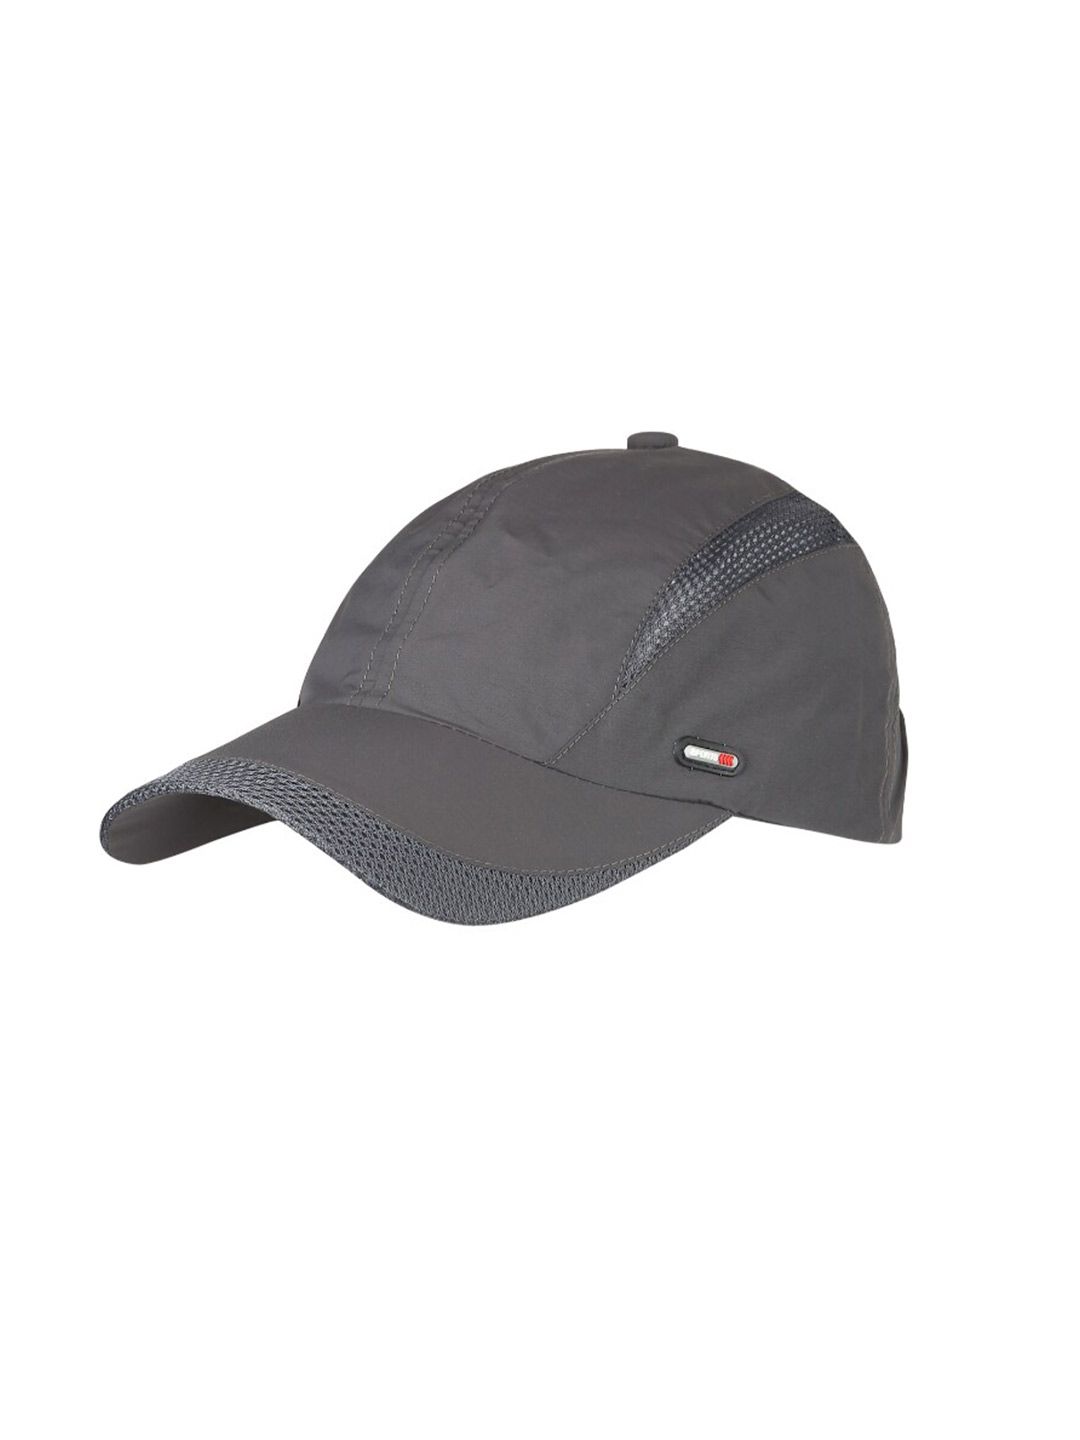 iSWEVEN Grey Snapback Cap Price in India